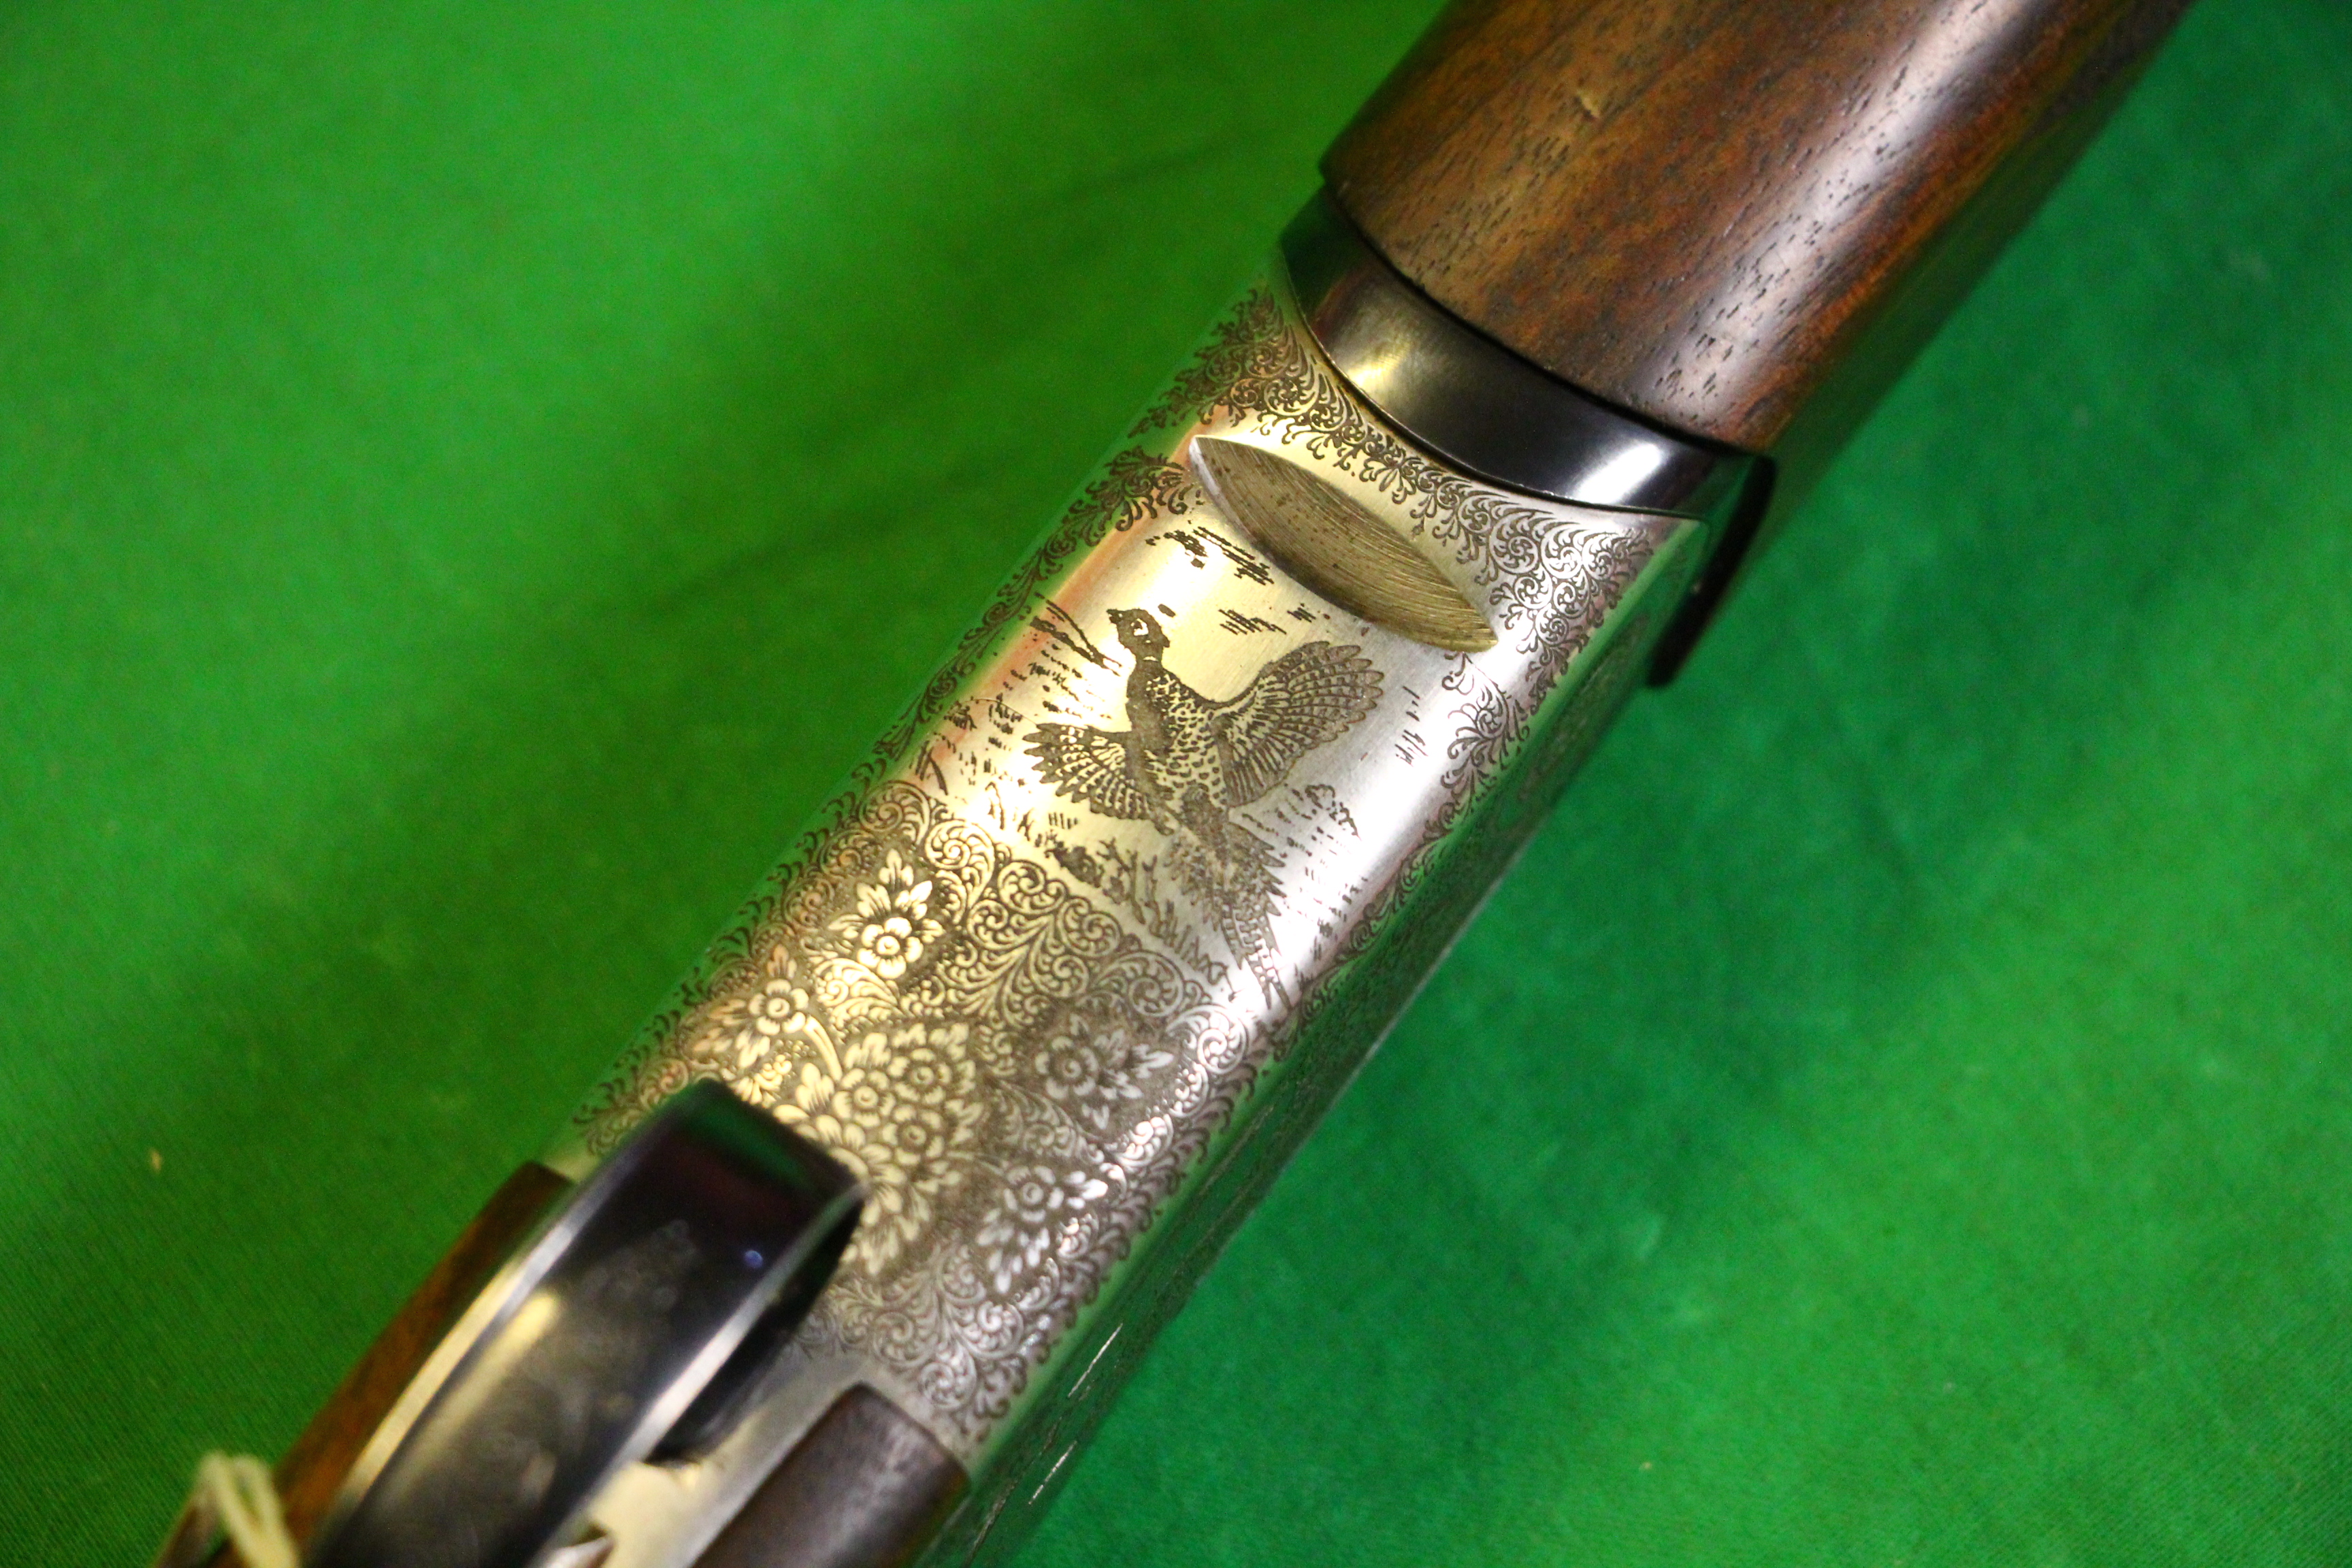 BETTINSOLI 12 BORE OVER AND UNDER SHOTGUN #98200 5 CHOKES AND KEY - (ALL GUNS TO BE INSPECTED AND - Image 11 of 13